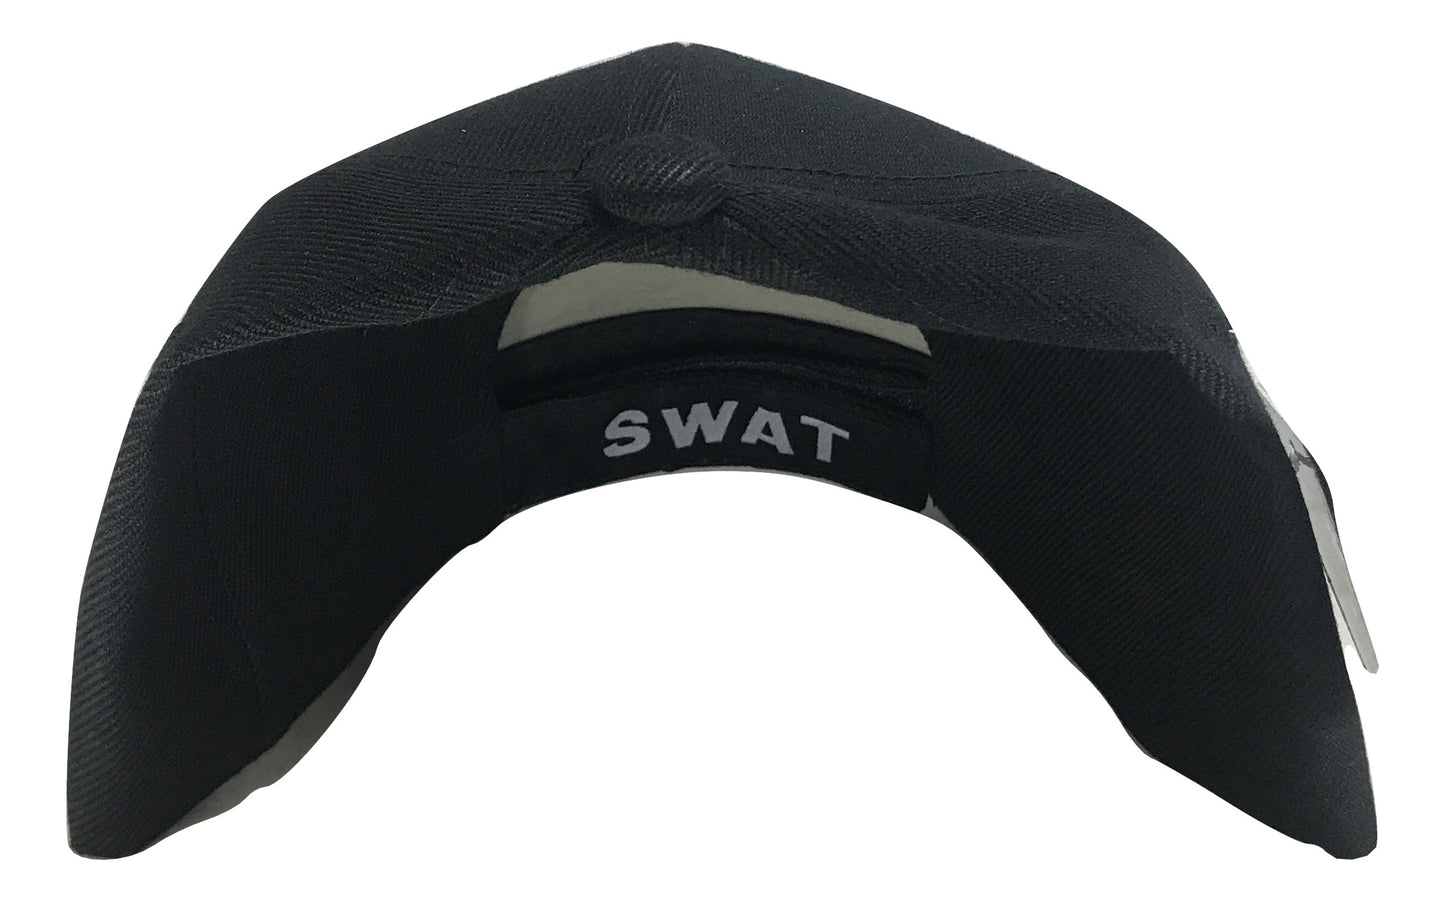 S.W.A.T Adjustable